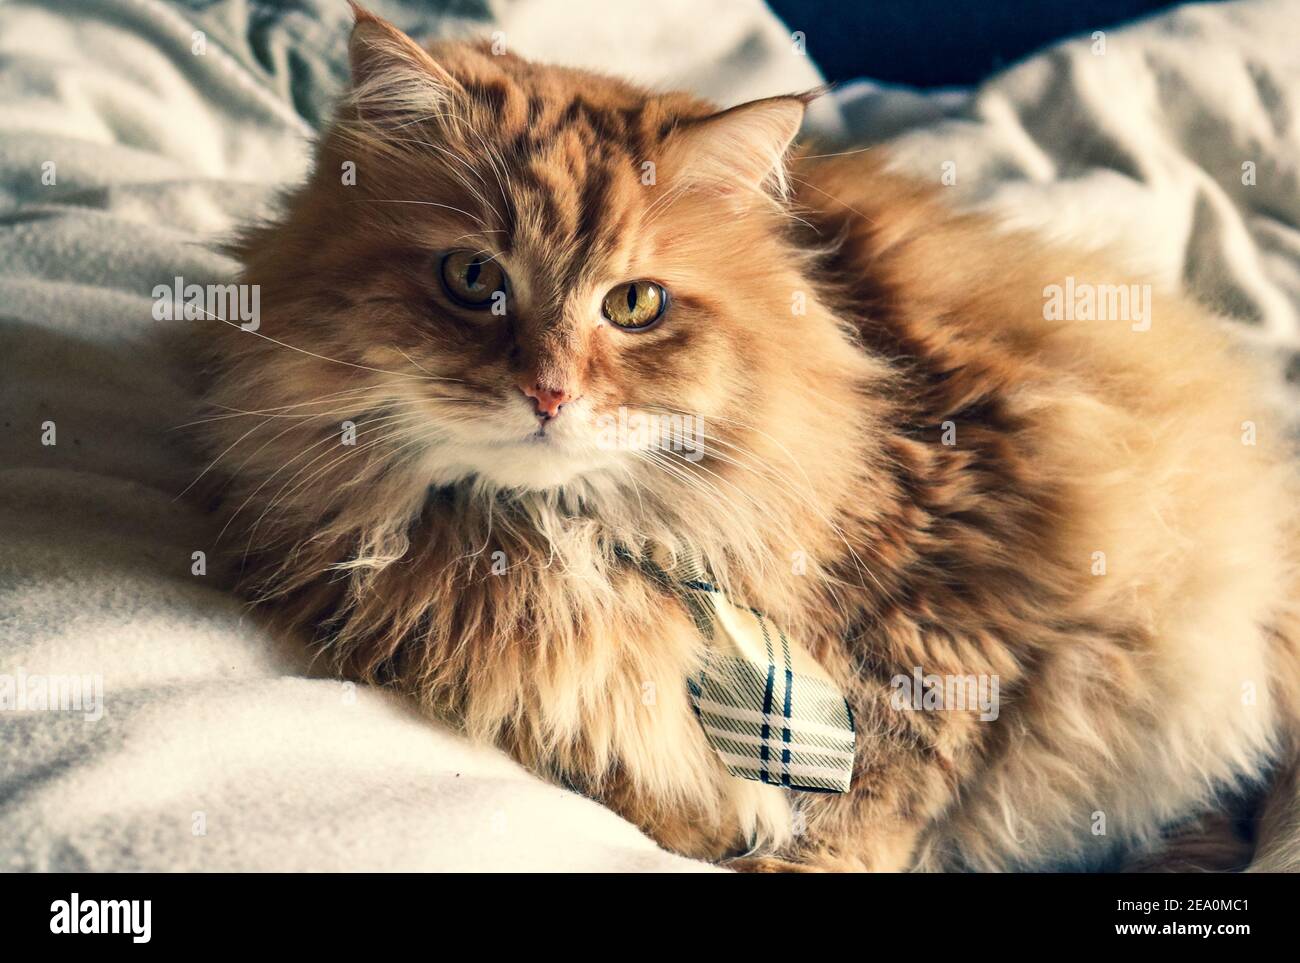 Fluffy ginger cat in bed wearing a tie Stock Photo